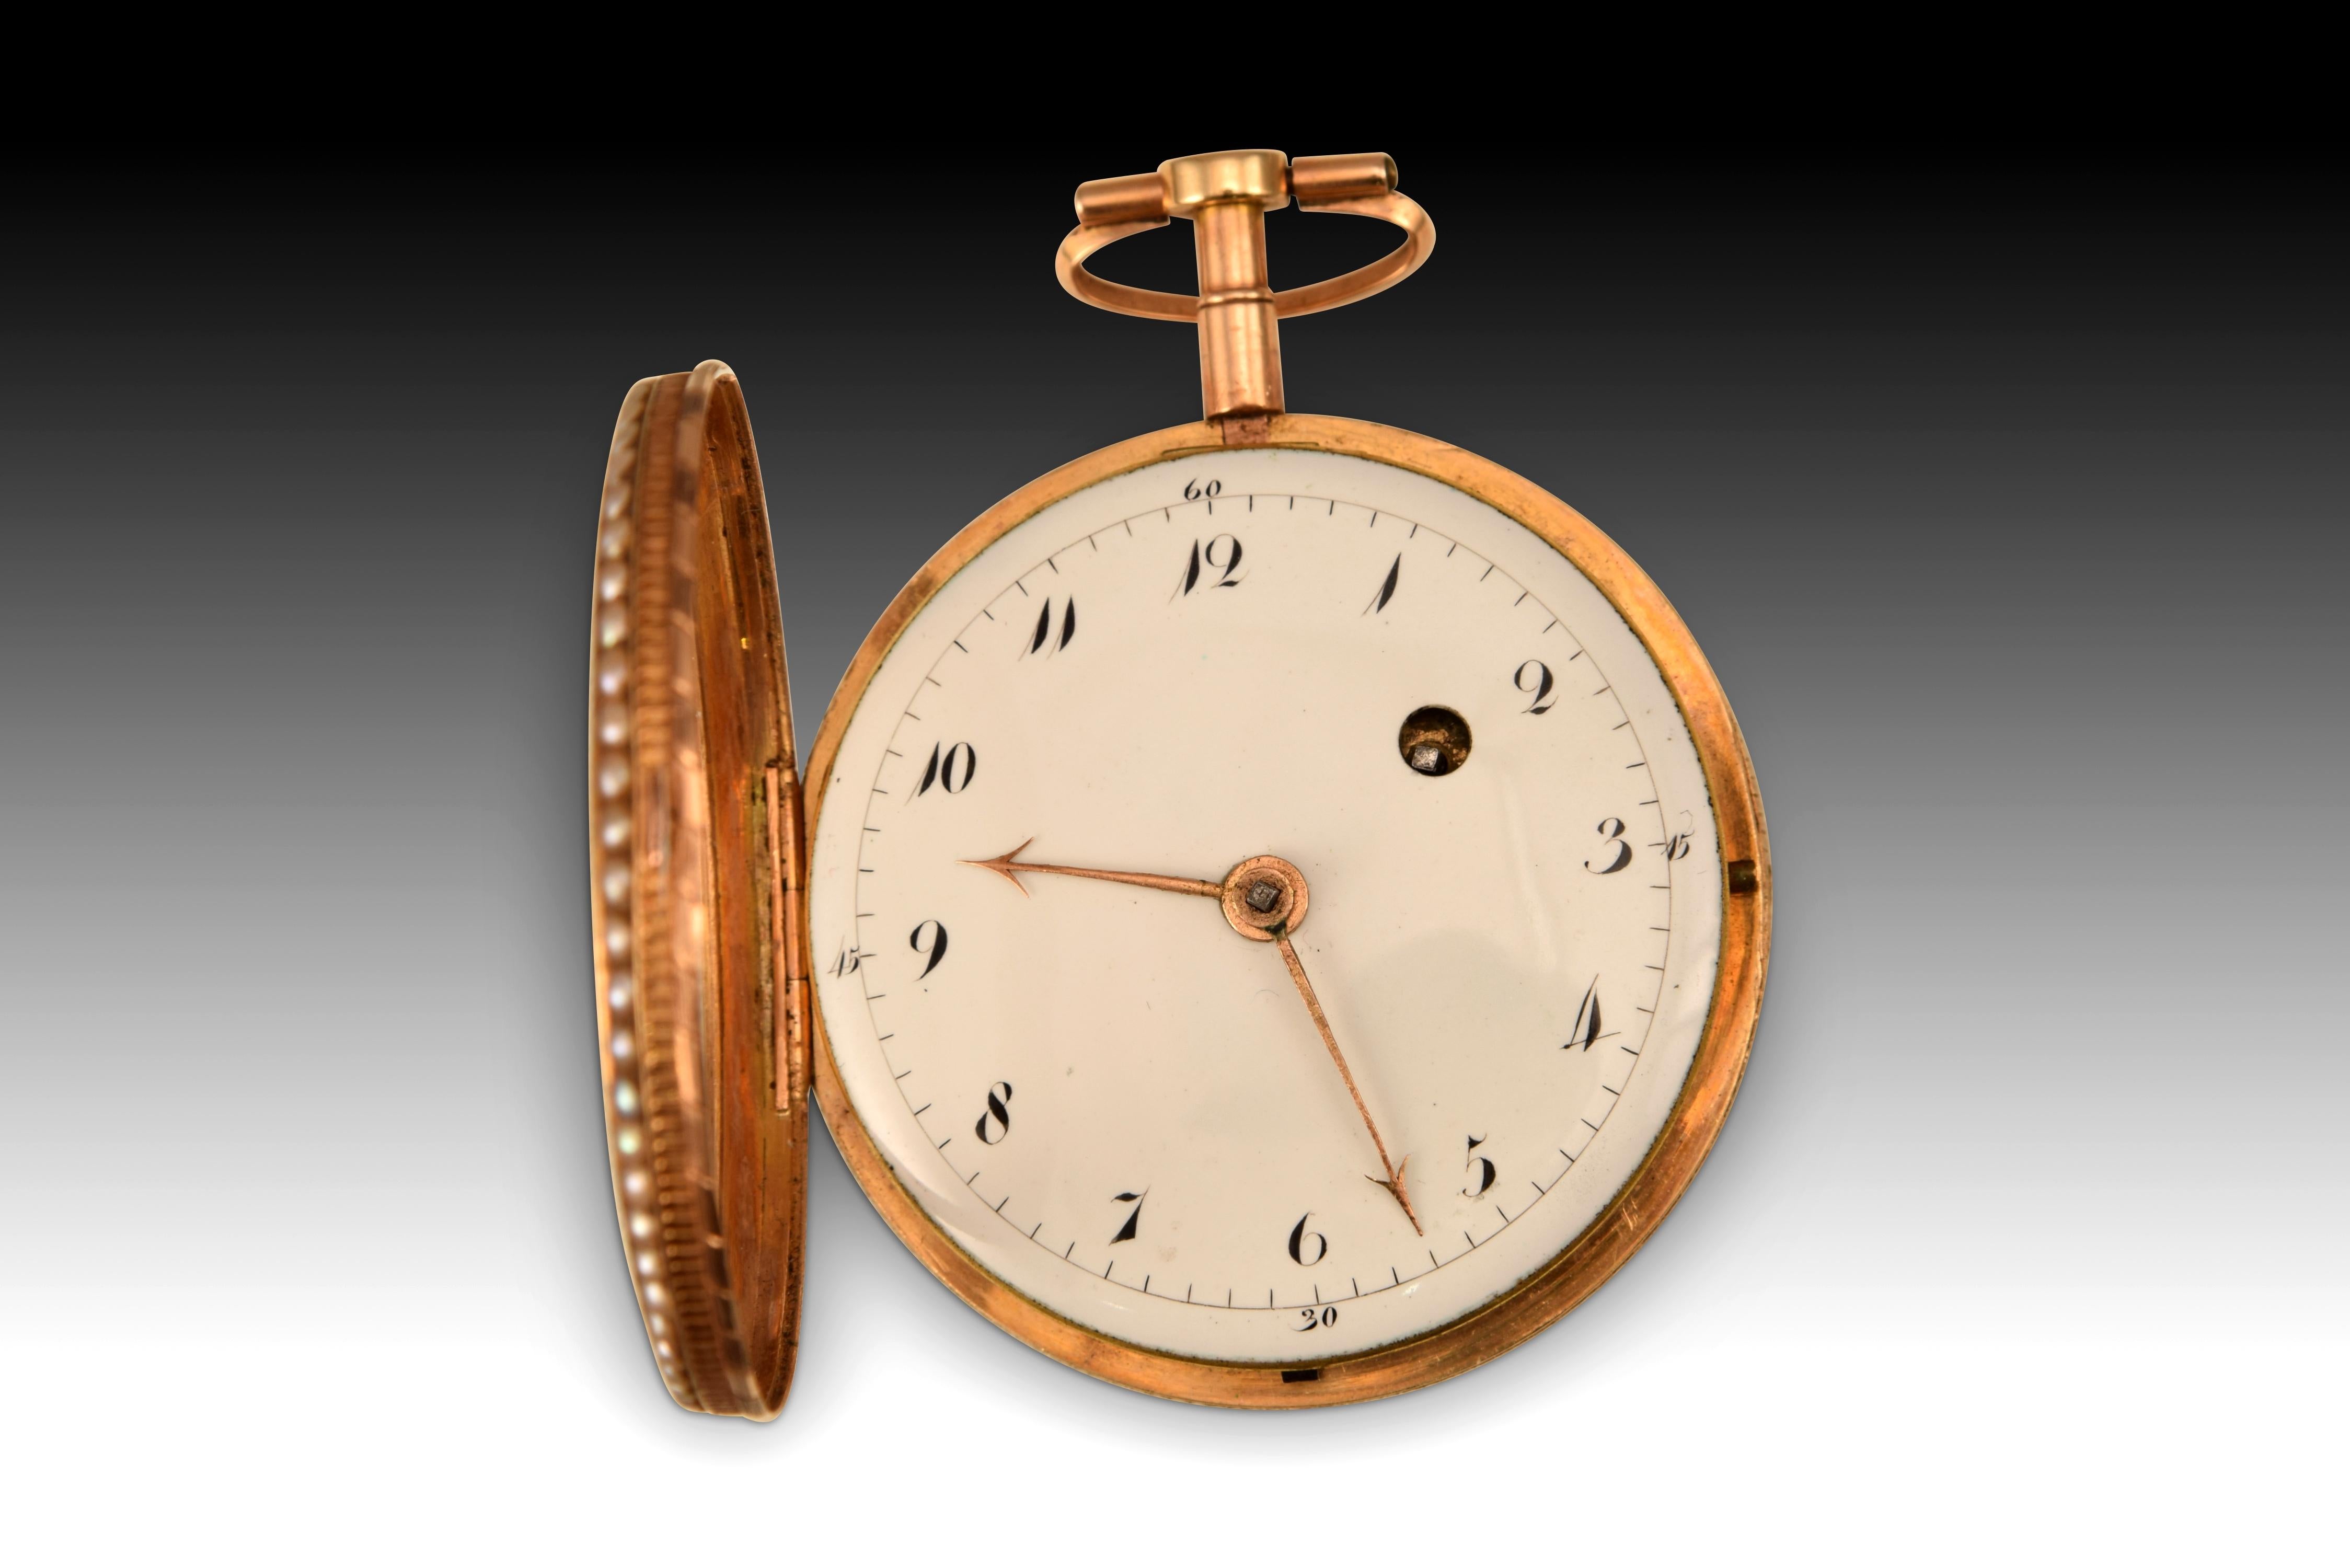 Neoclassical Pocket Watch, Jaqs Blanc, Gold, Enamel, Etc. Possibly ca Late 18th C For Sale